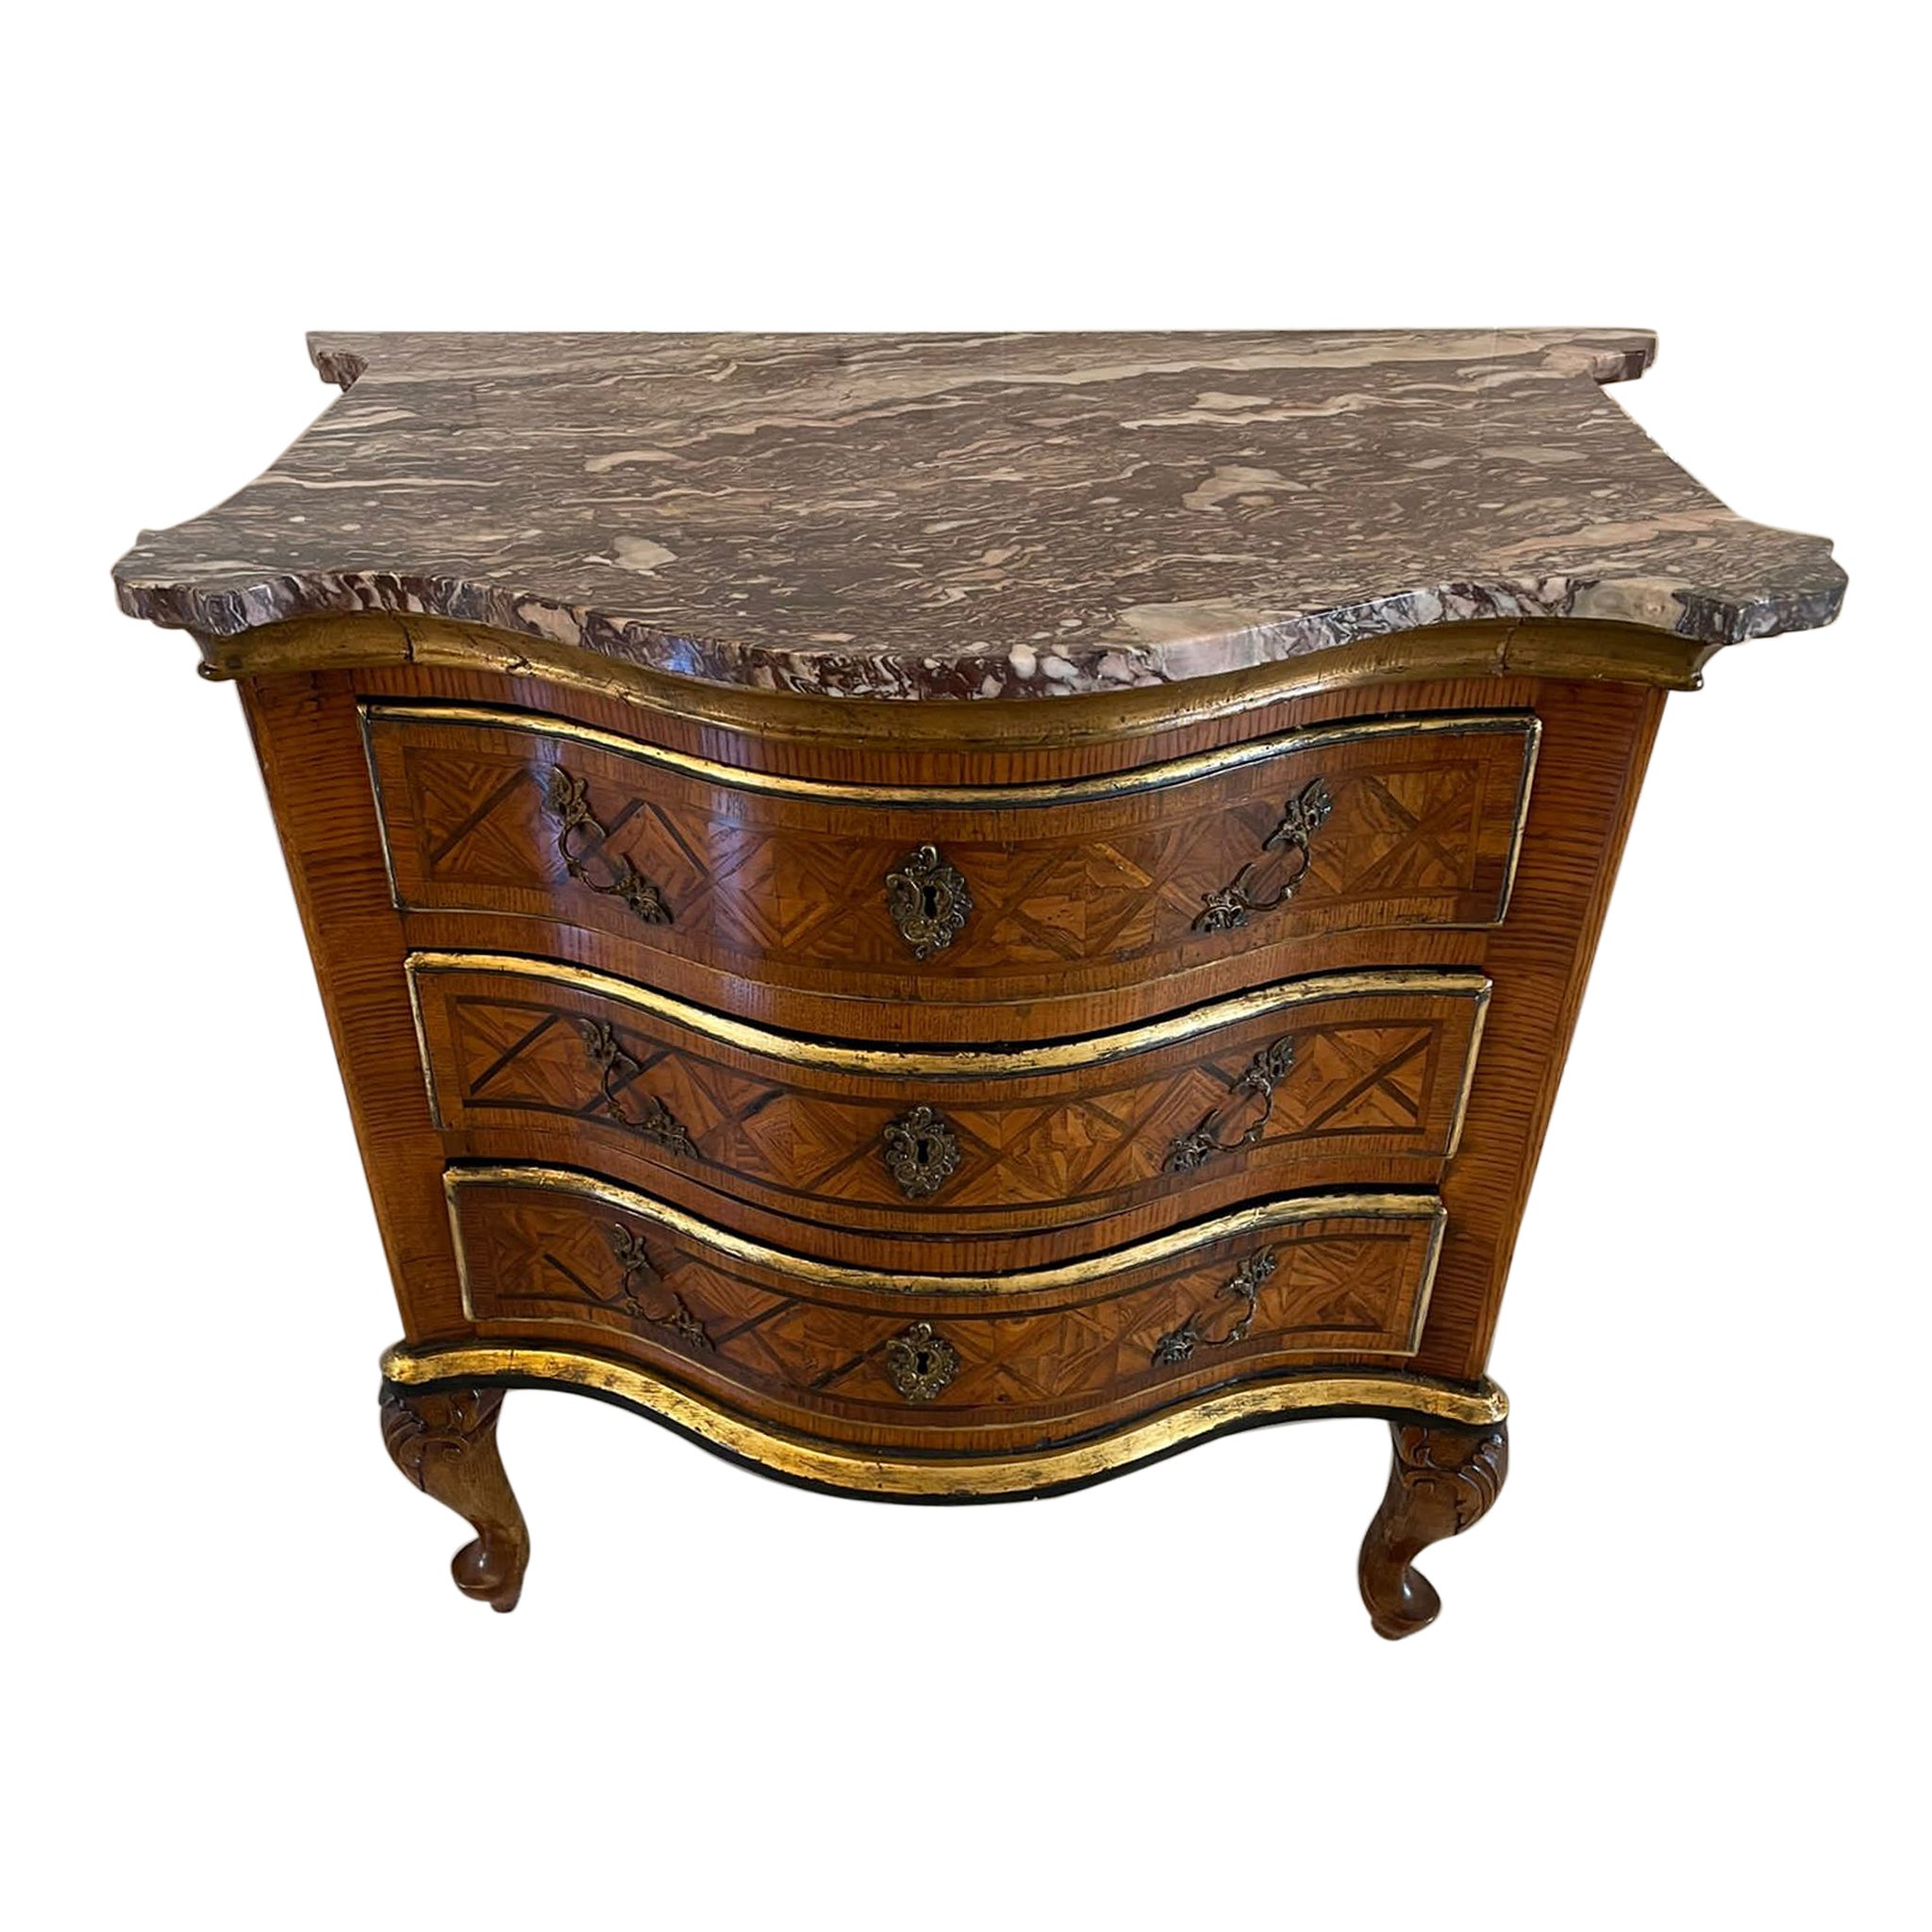 Antique Quality Parquetry Inlaid Serpentine Shaped Marble Top Commode Chest For Sale